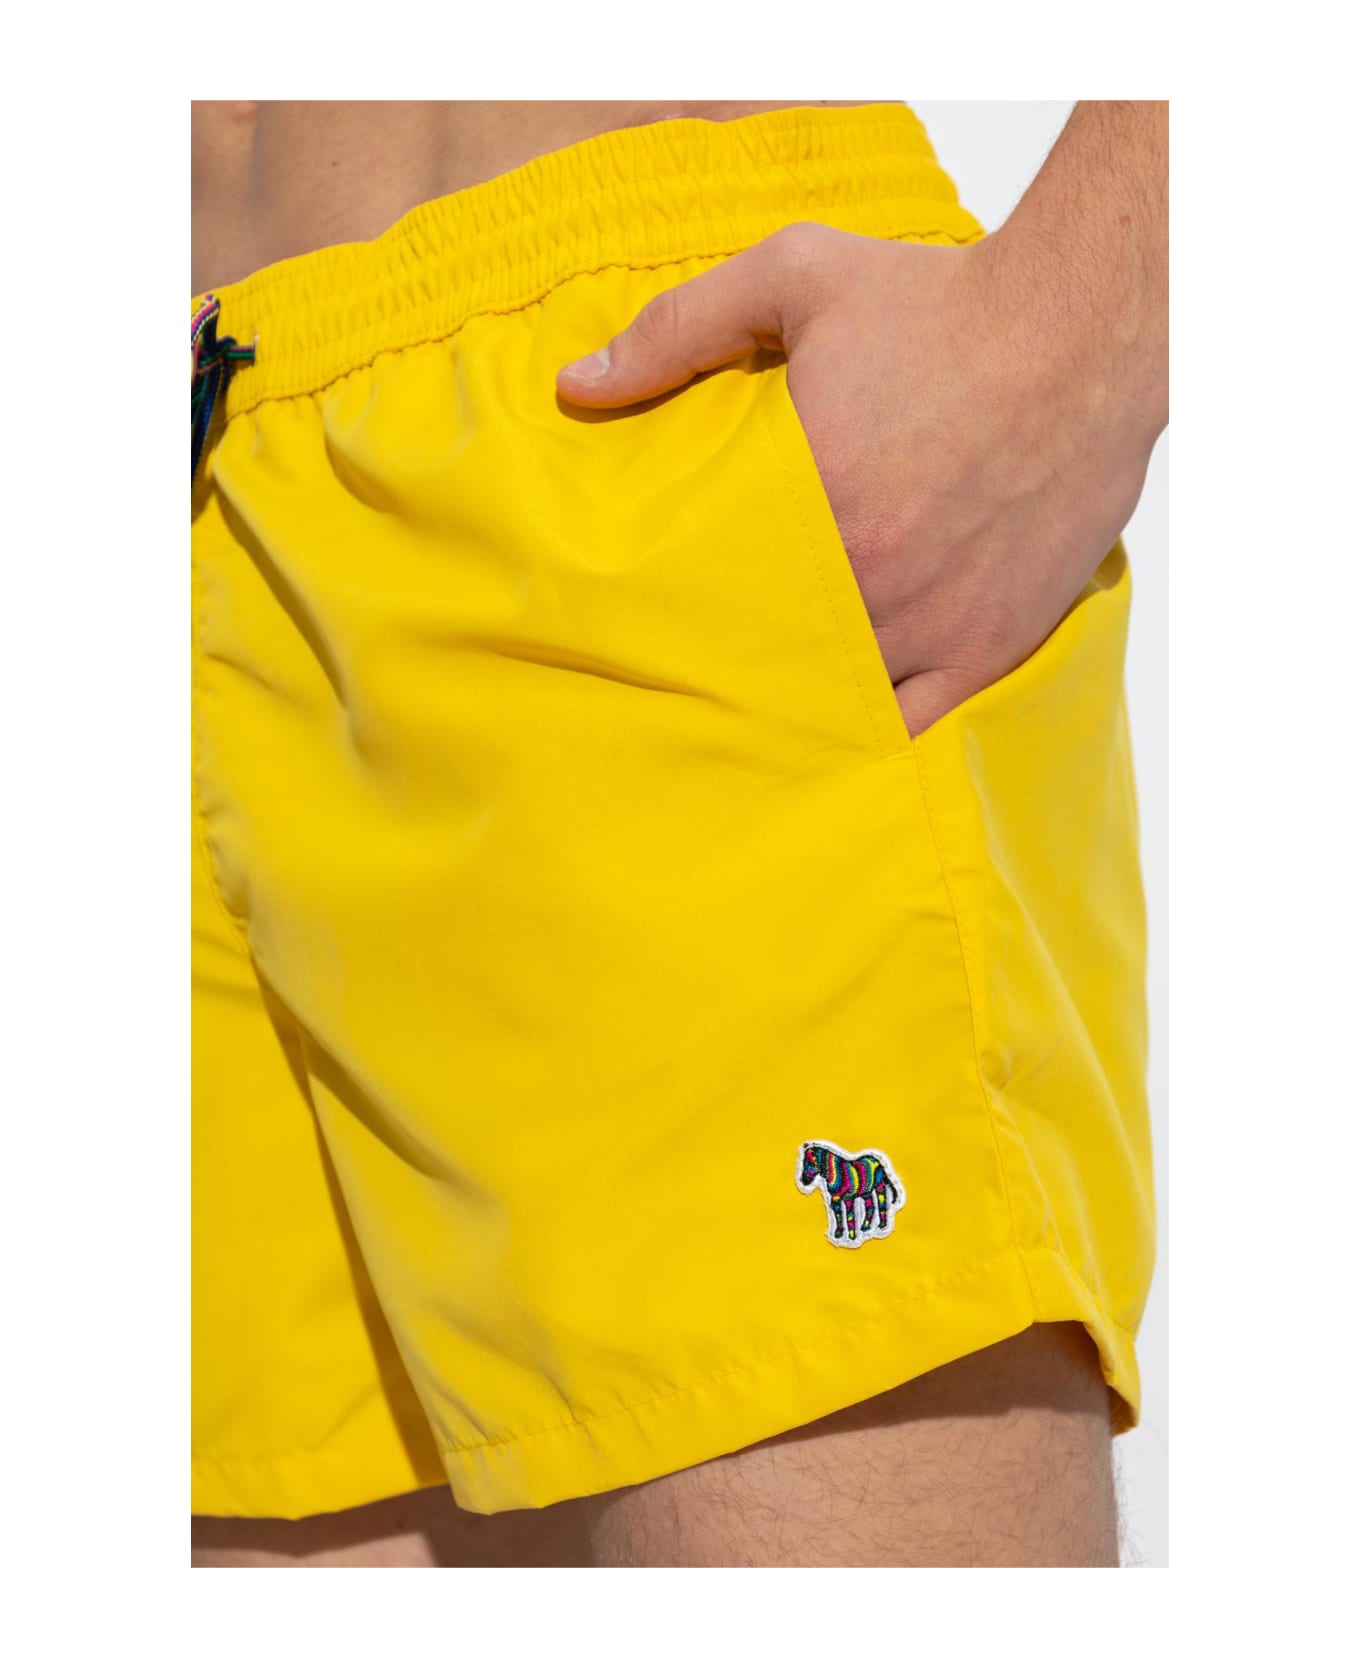 Paul Smith Swimming Shorts With Patch - Yellow